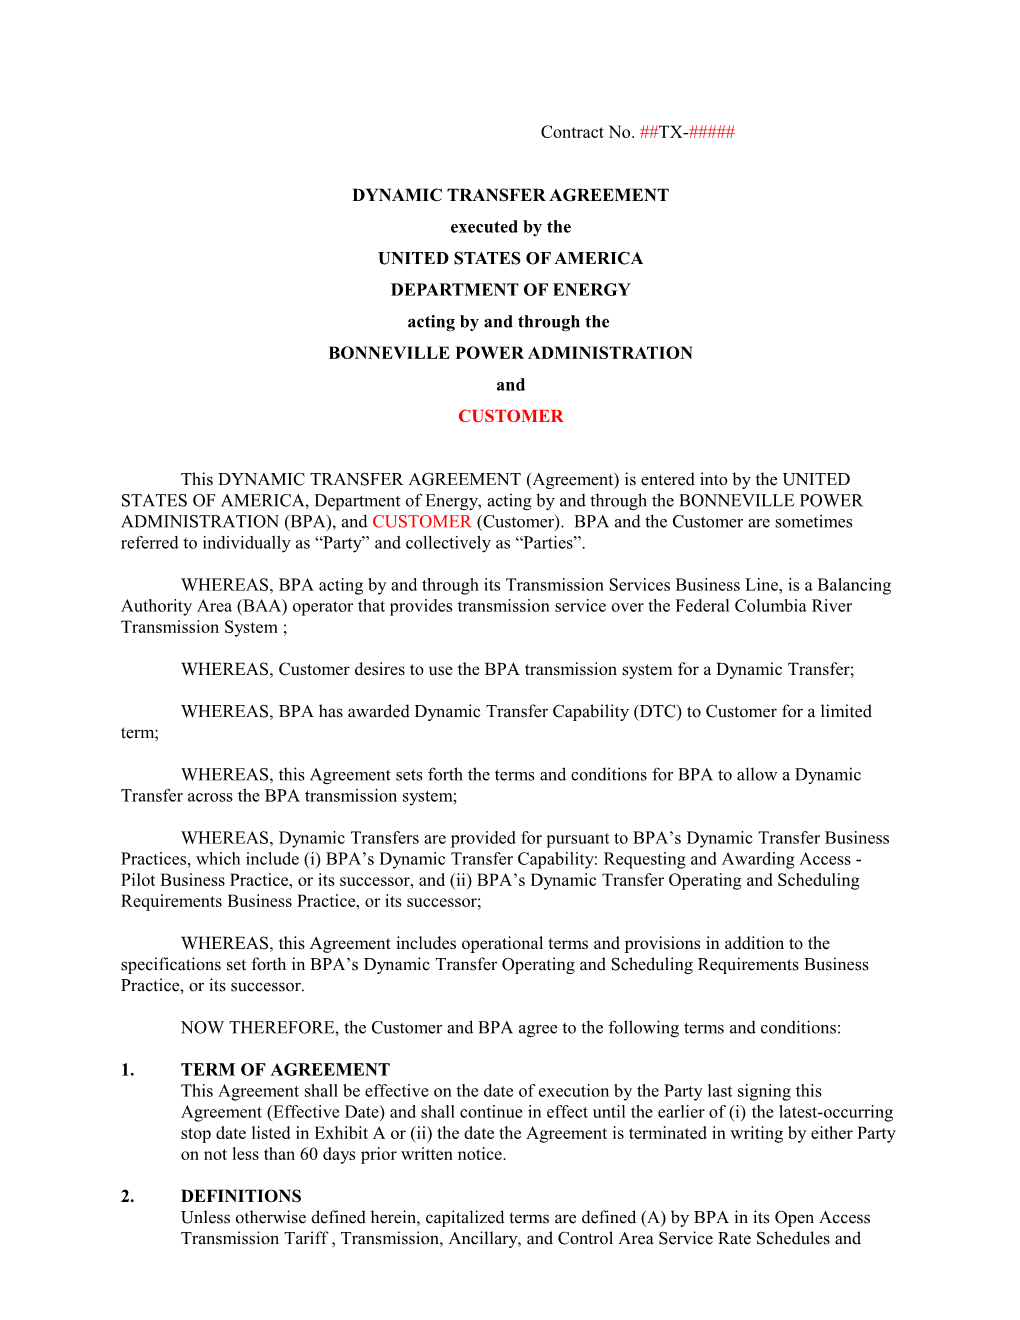 Dynamic Transfer Agreement Template 121317